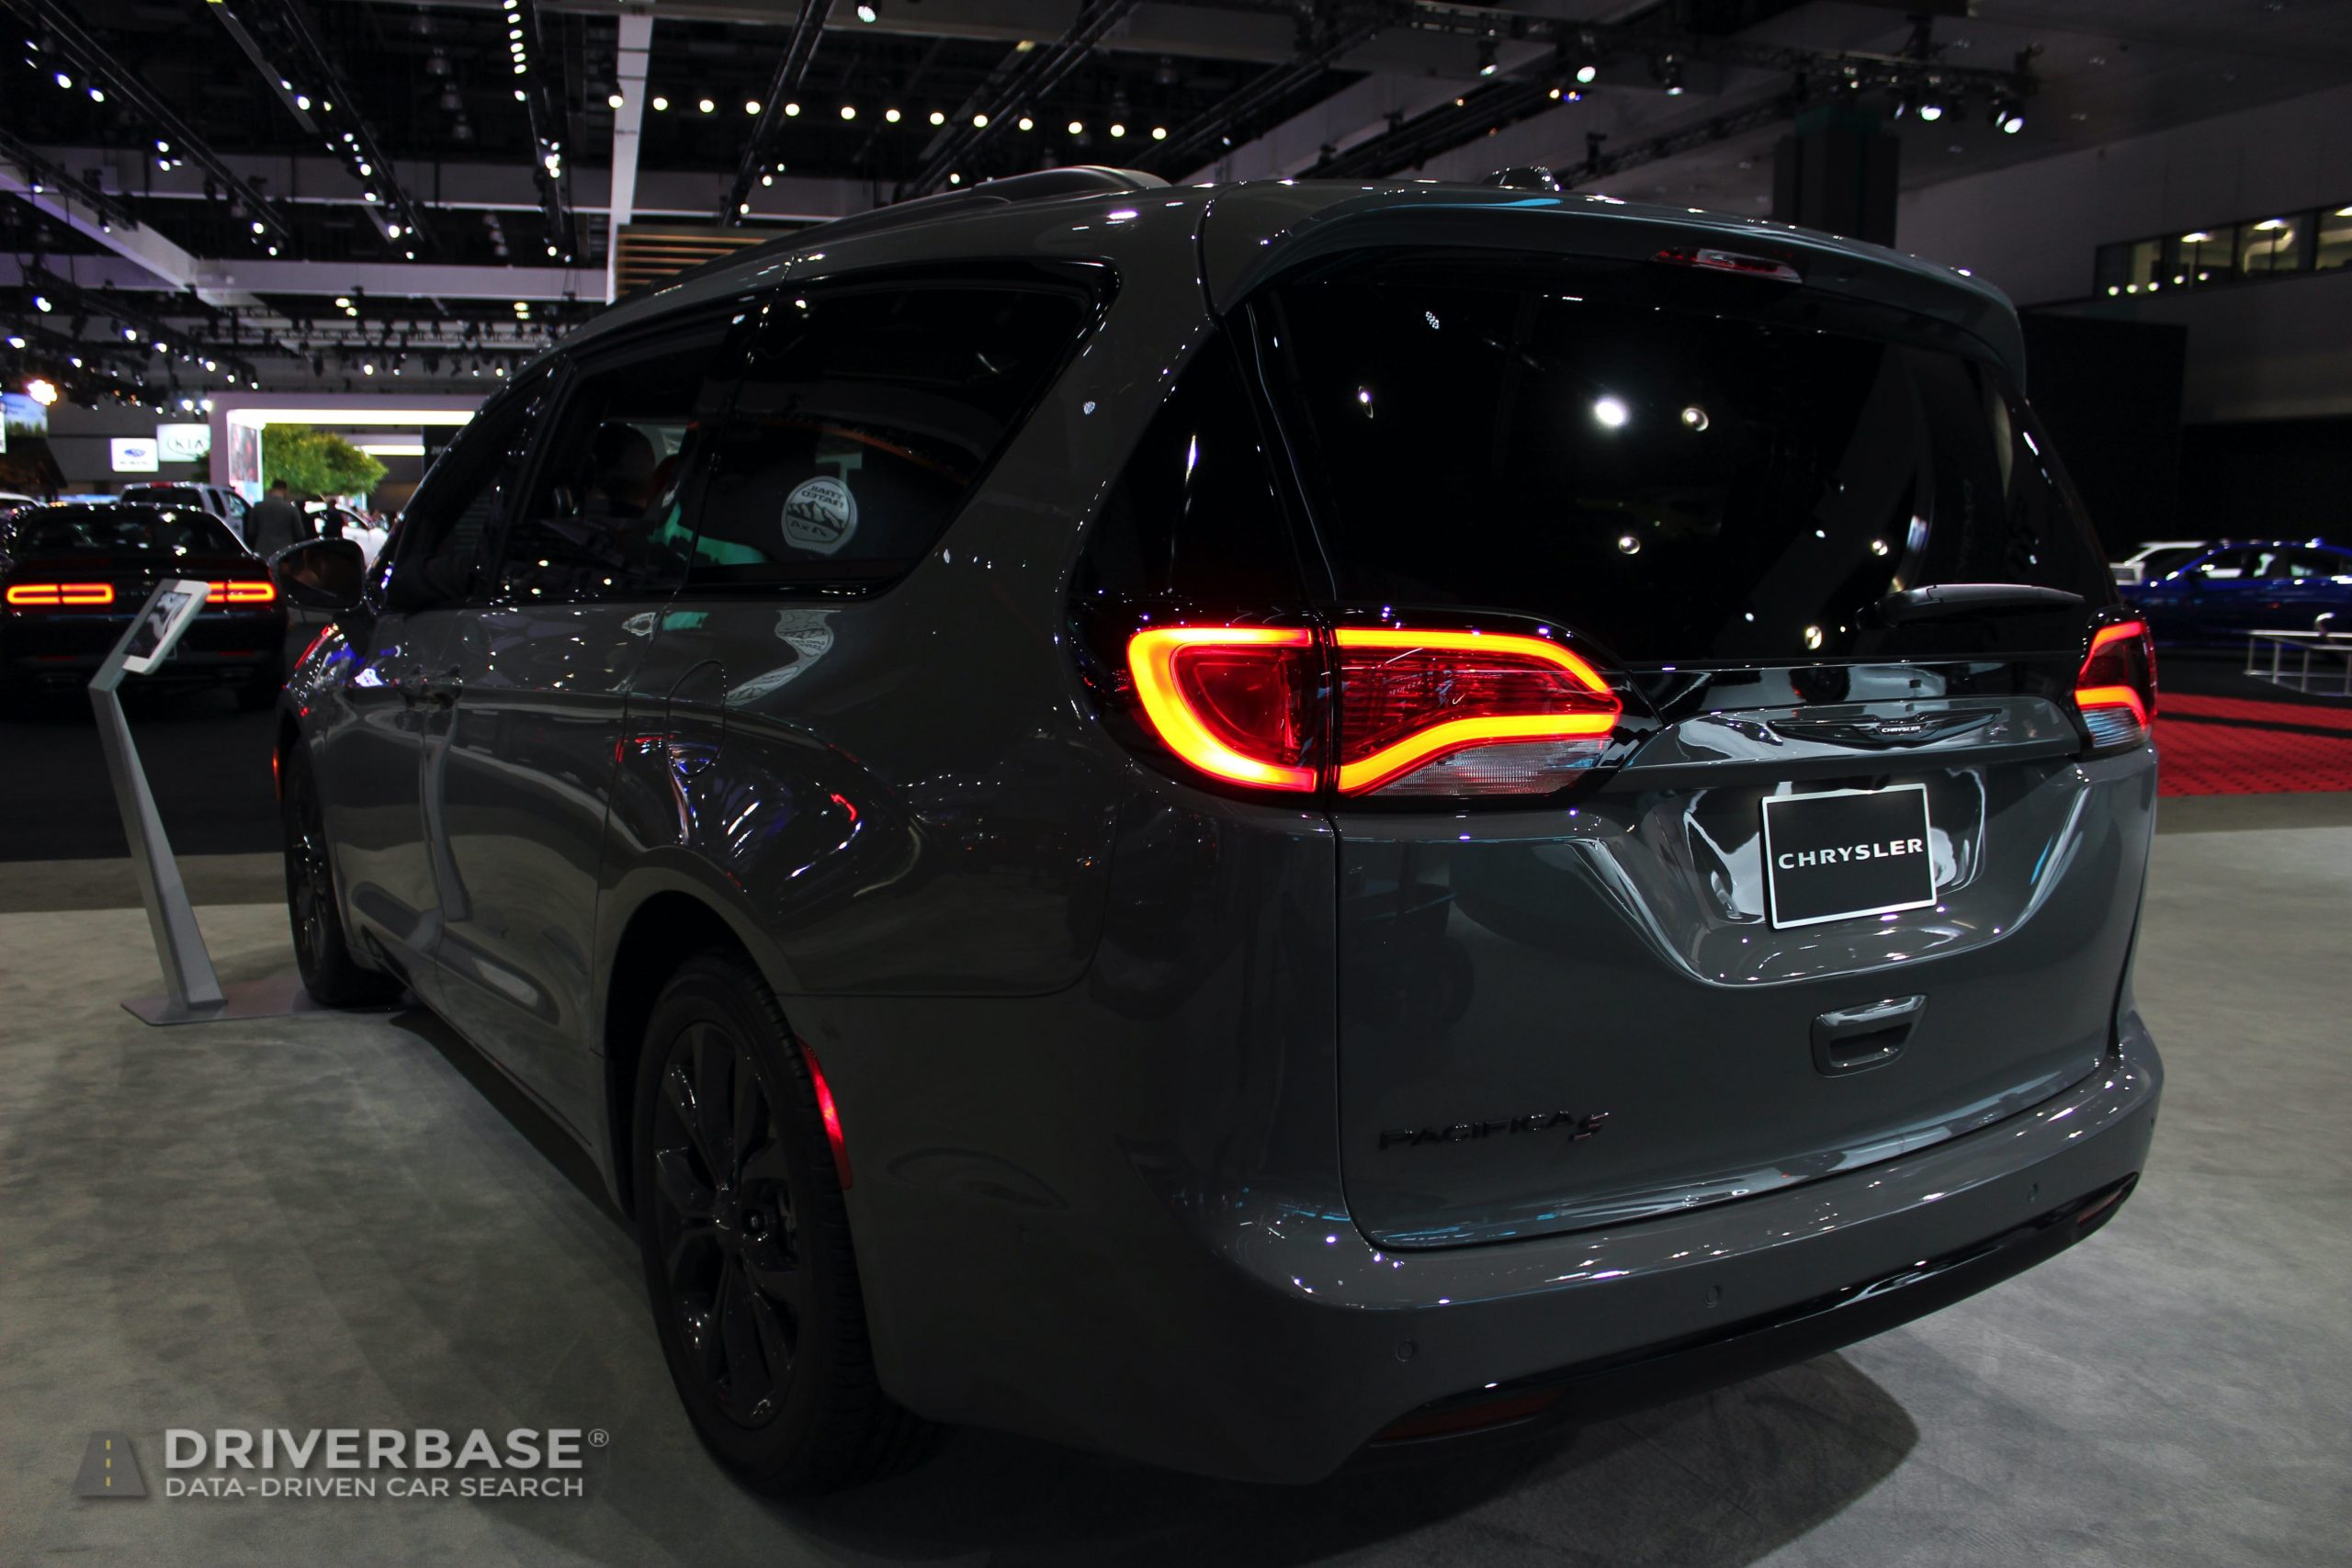 2020 Chrysler Pacifica S at the 2019 Los Angeles Auto Show